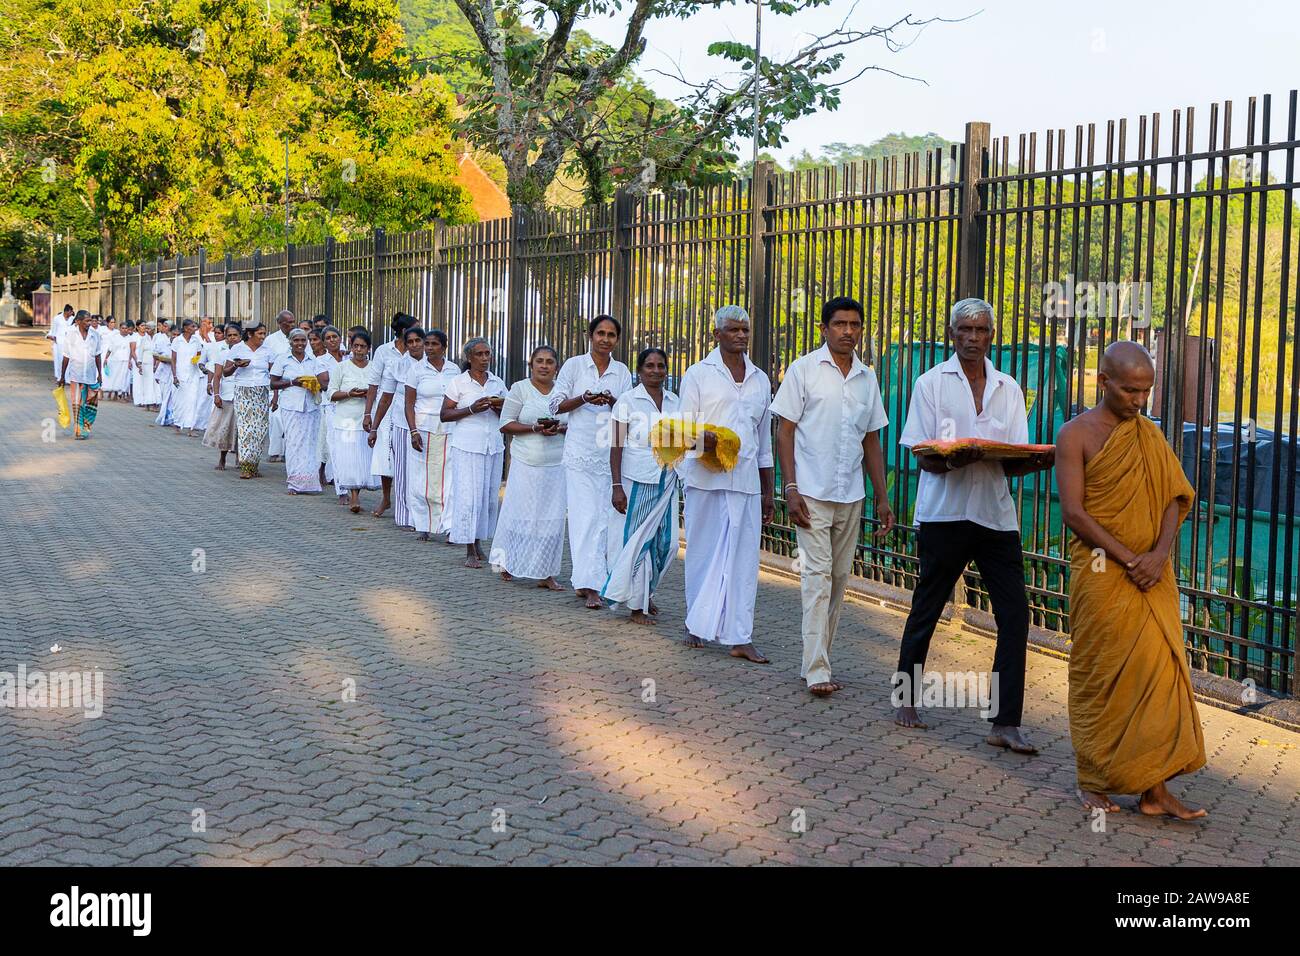 Procession of the local people carrying offerings to the Temple of the tooth Relic, in Kandy, Sri Lanka Stock Photo